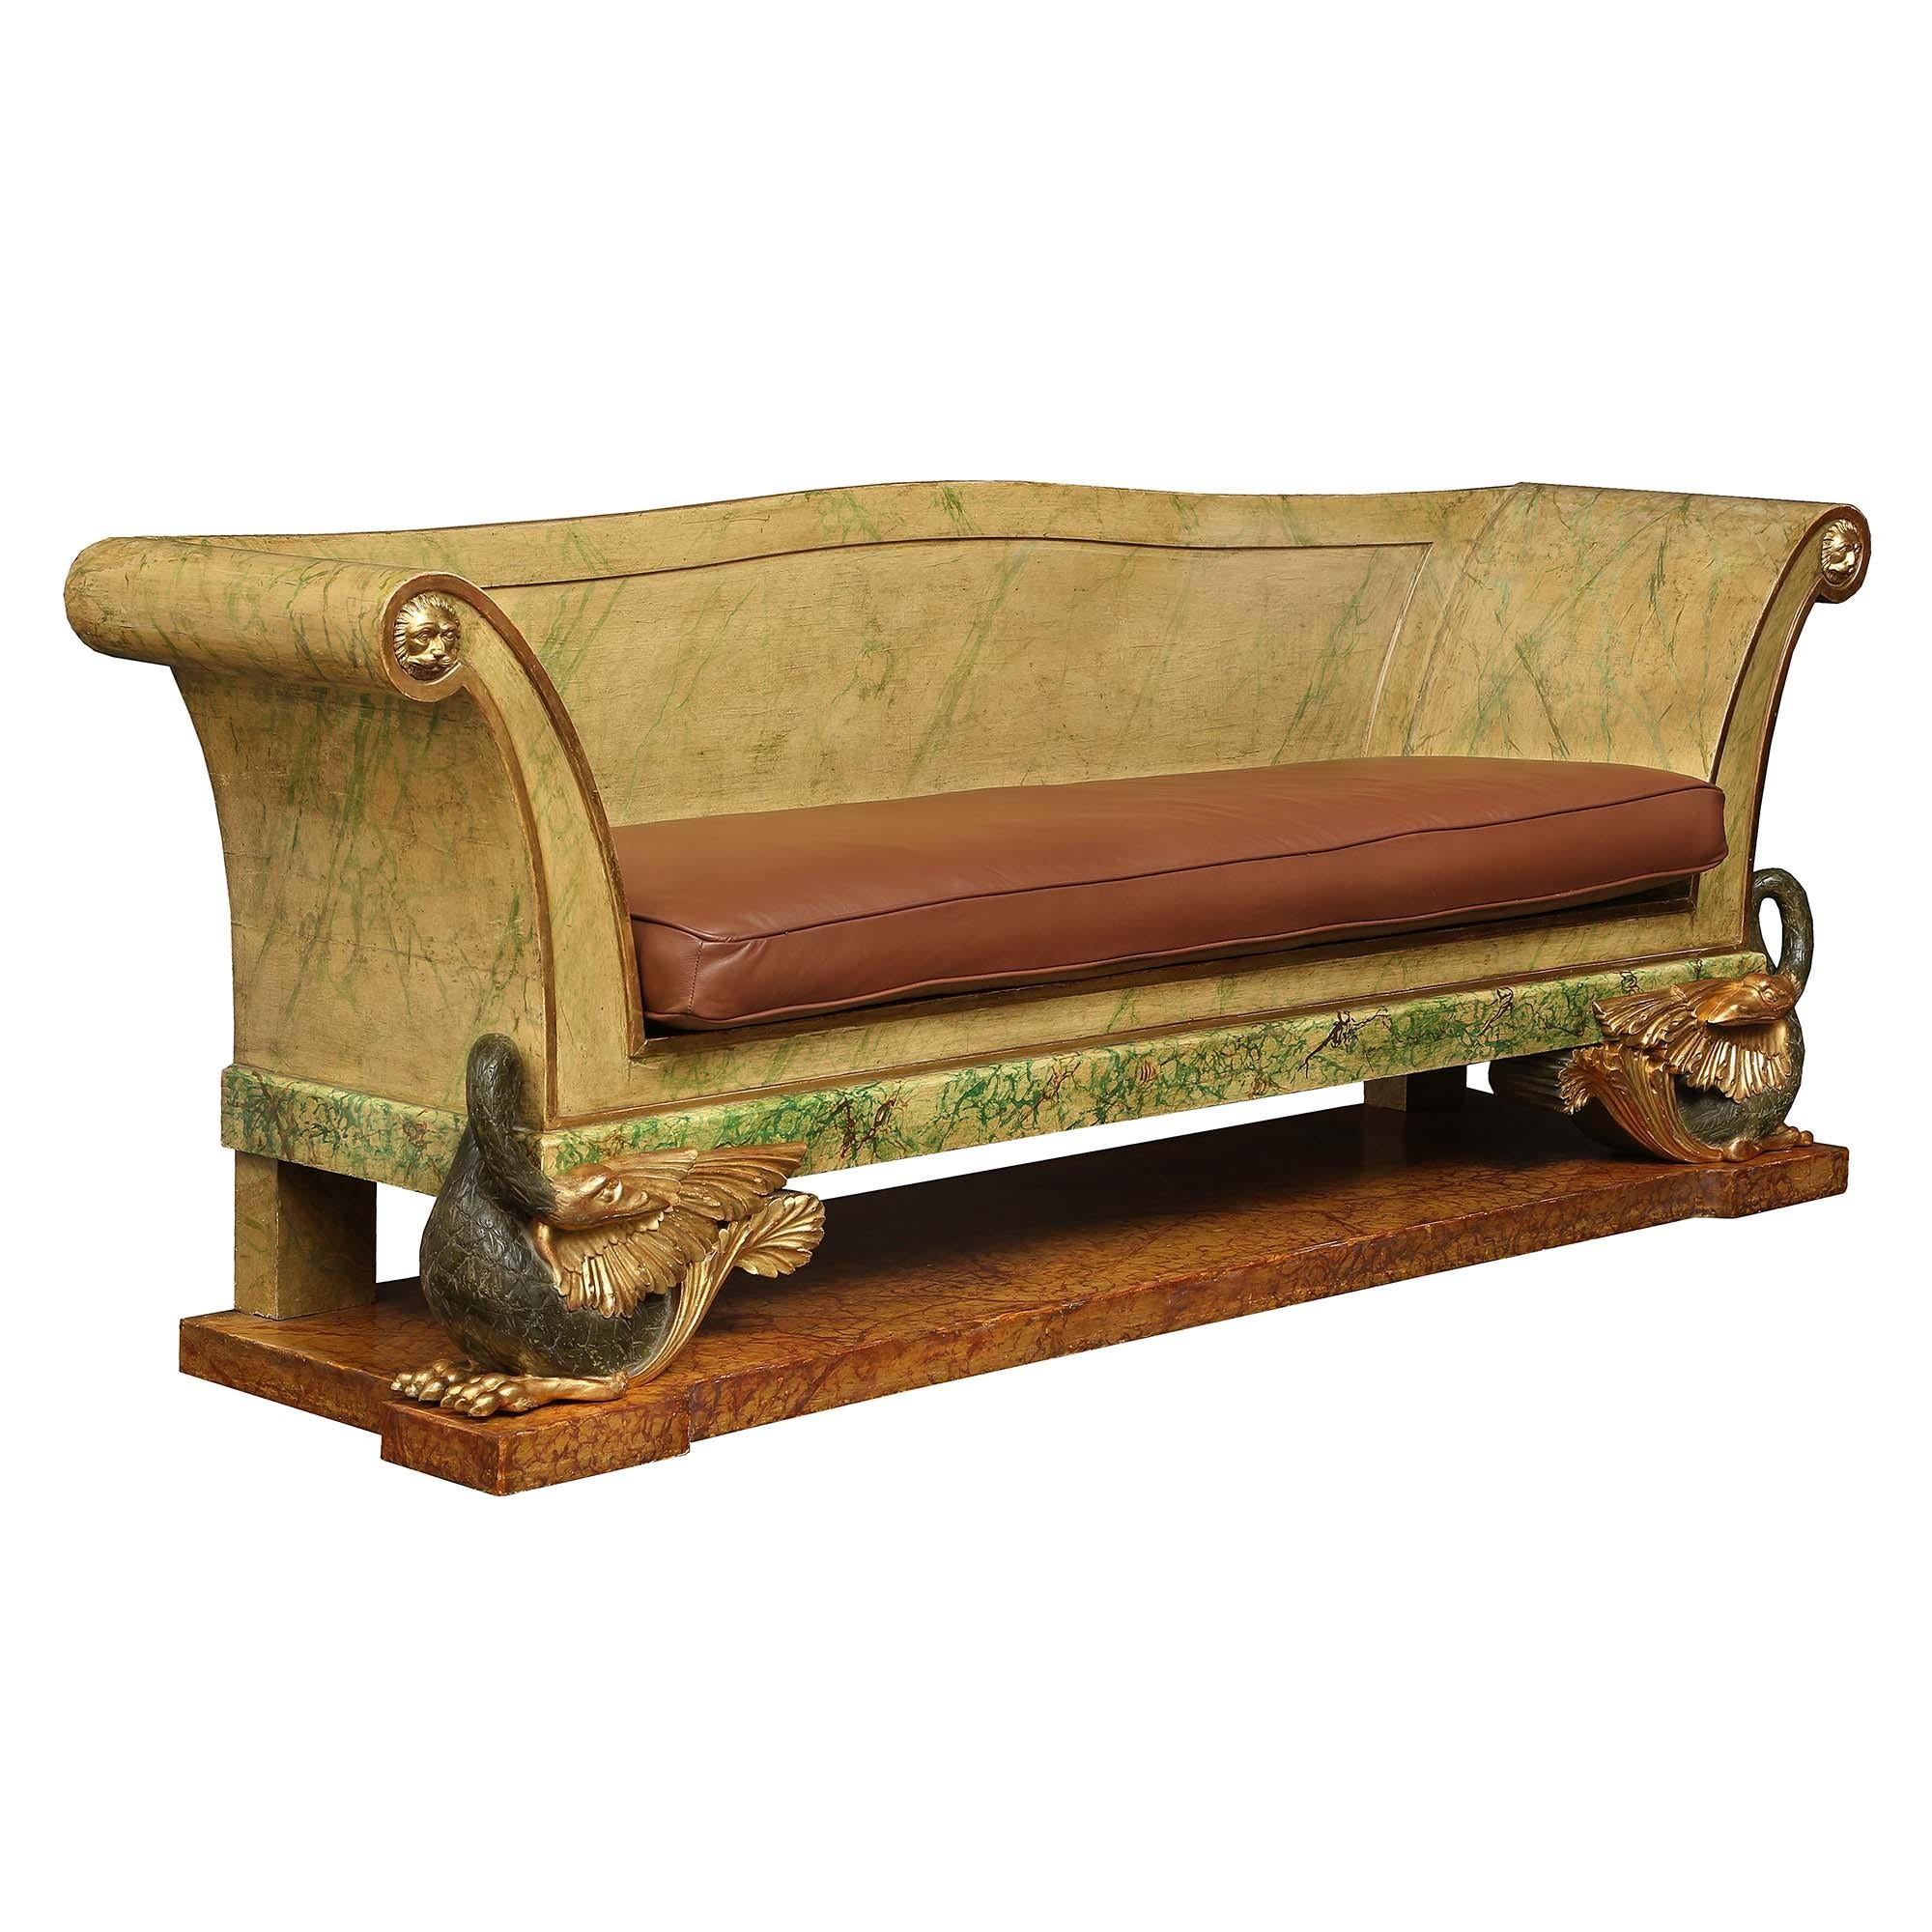 A stunning and unique Italian early 19th century Neo-Classical st. settee. The settee with all original paint and faux marble finished is raised on a solid rectangular base. With square supports in the back and finely carved superb swan shaped